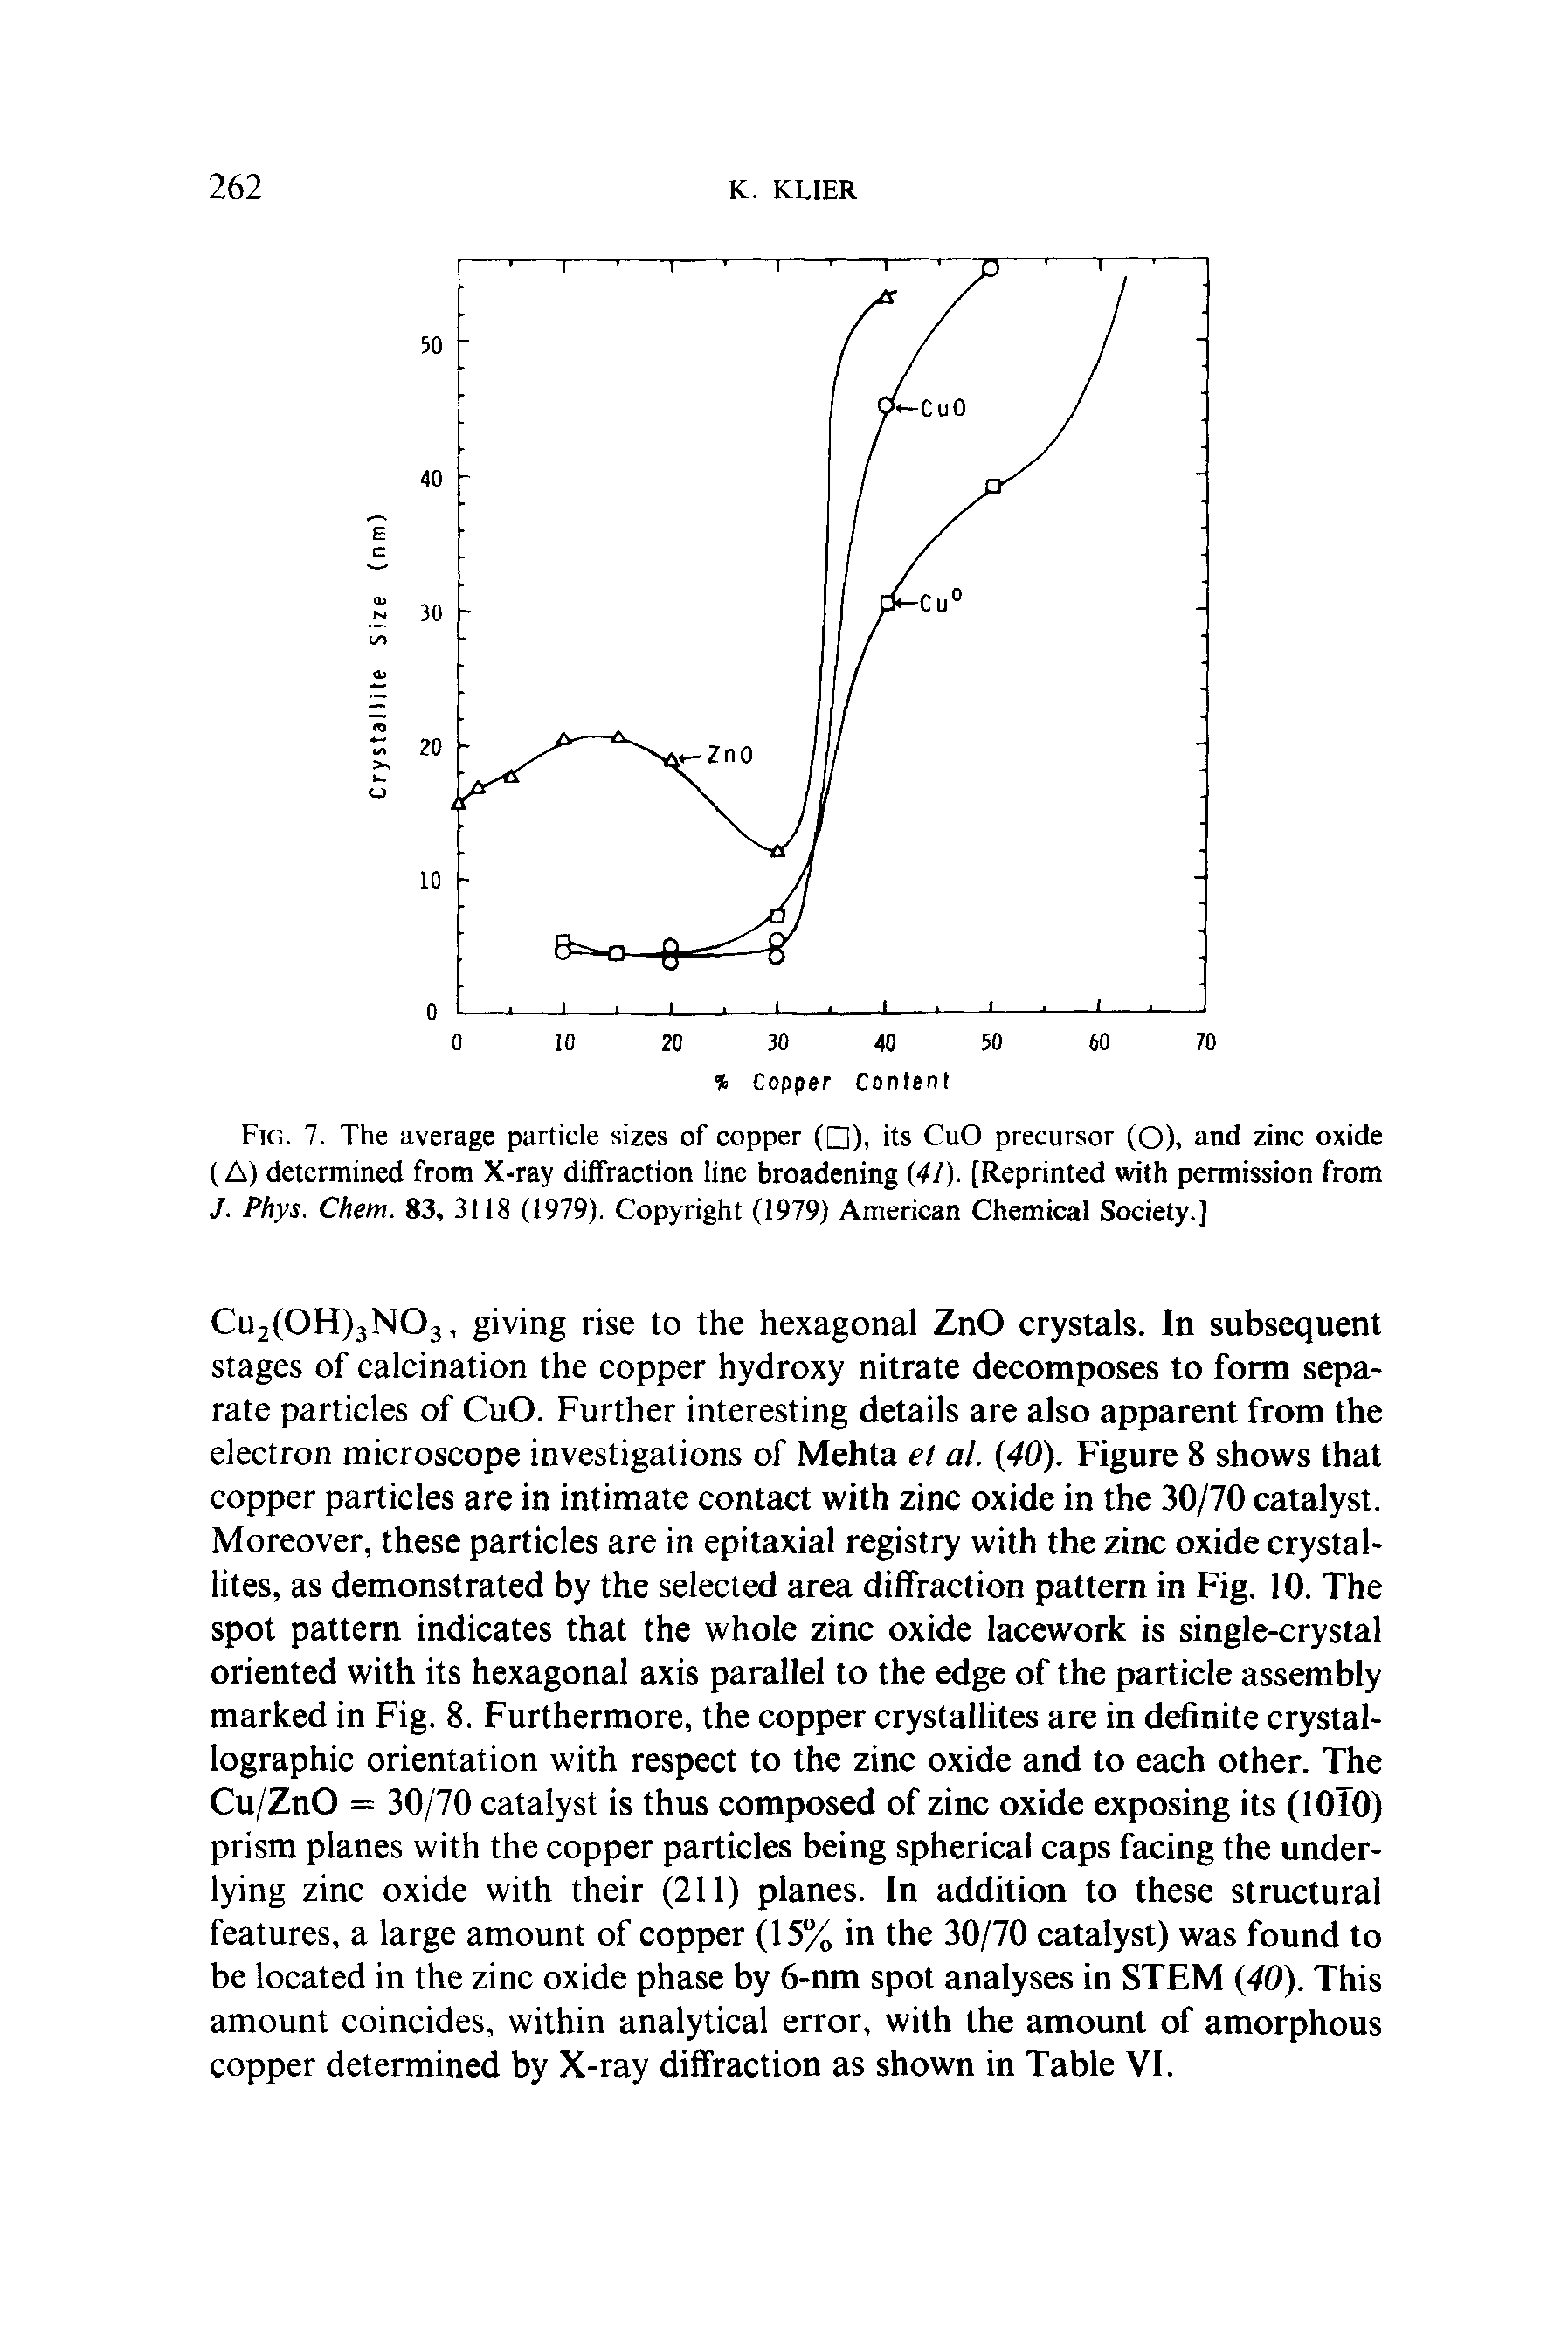 Fig. 7. The average particle sizes of copper ( ), its CuO precursor (O), and zinc oxide (A) determined from X-ray diffraction line broadening (41). [Reprinted with permission from J. Phys. Chem. 83, 3118 (1979). Copyright (1979) American Chemical Society.]...